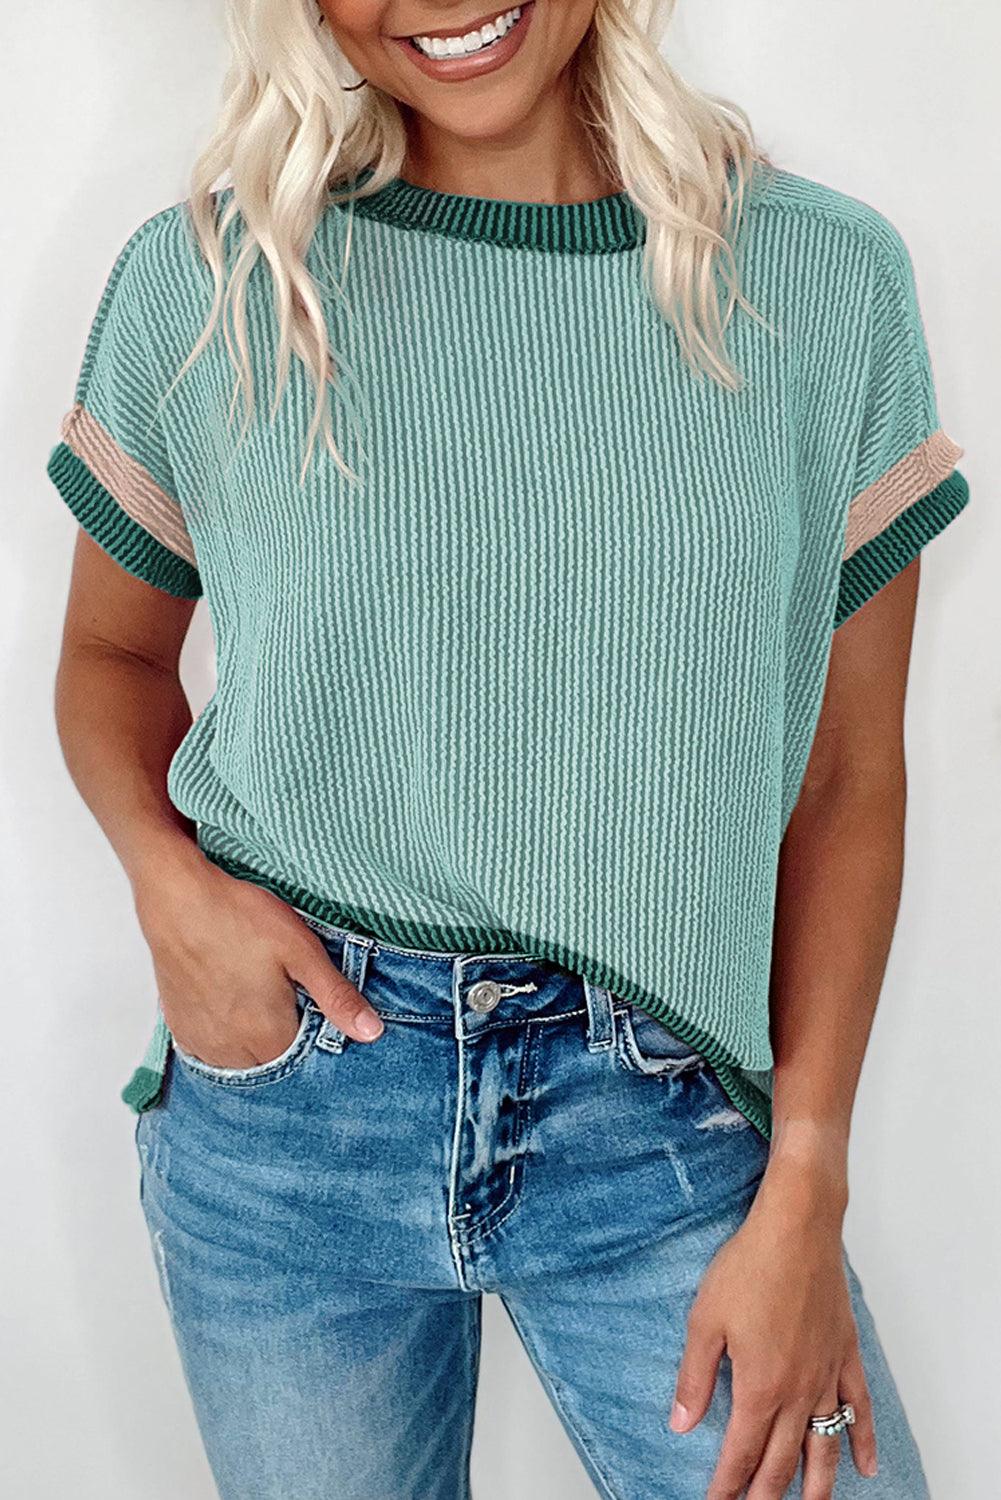 Grass Green Textured Contrast Color Round Neck T Shirt